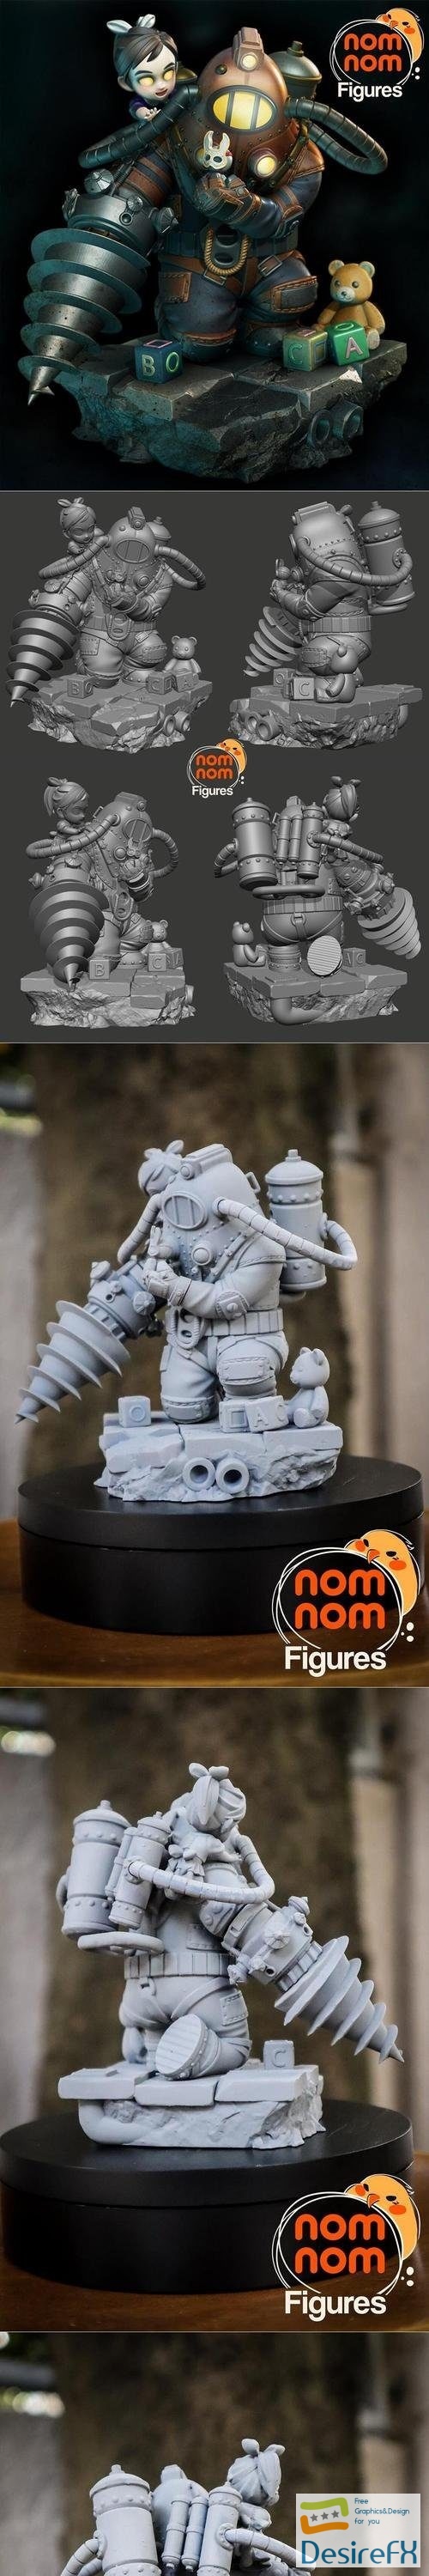 Chibi Big Daddy and Little Sister from Bioshock – 3D Print